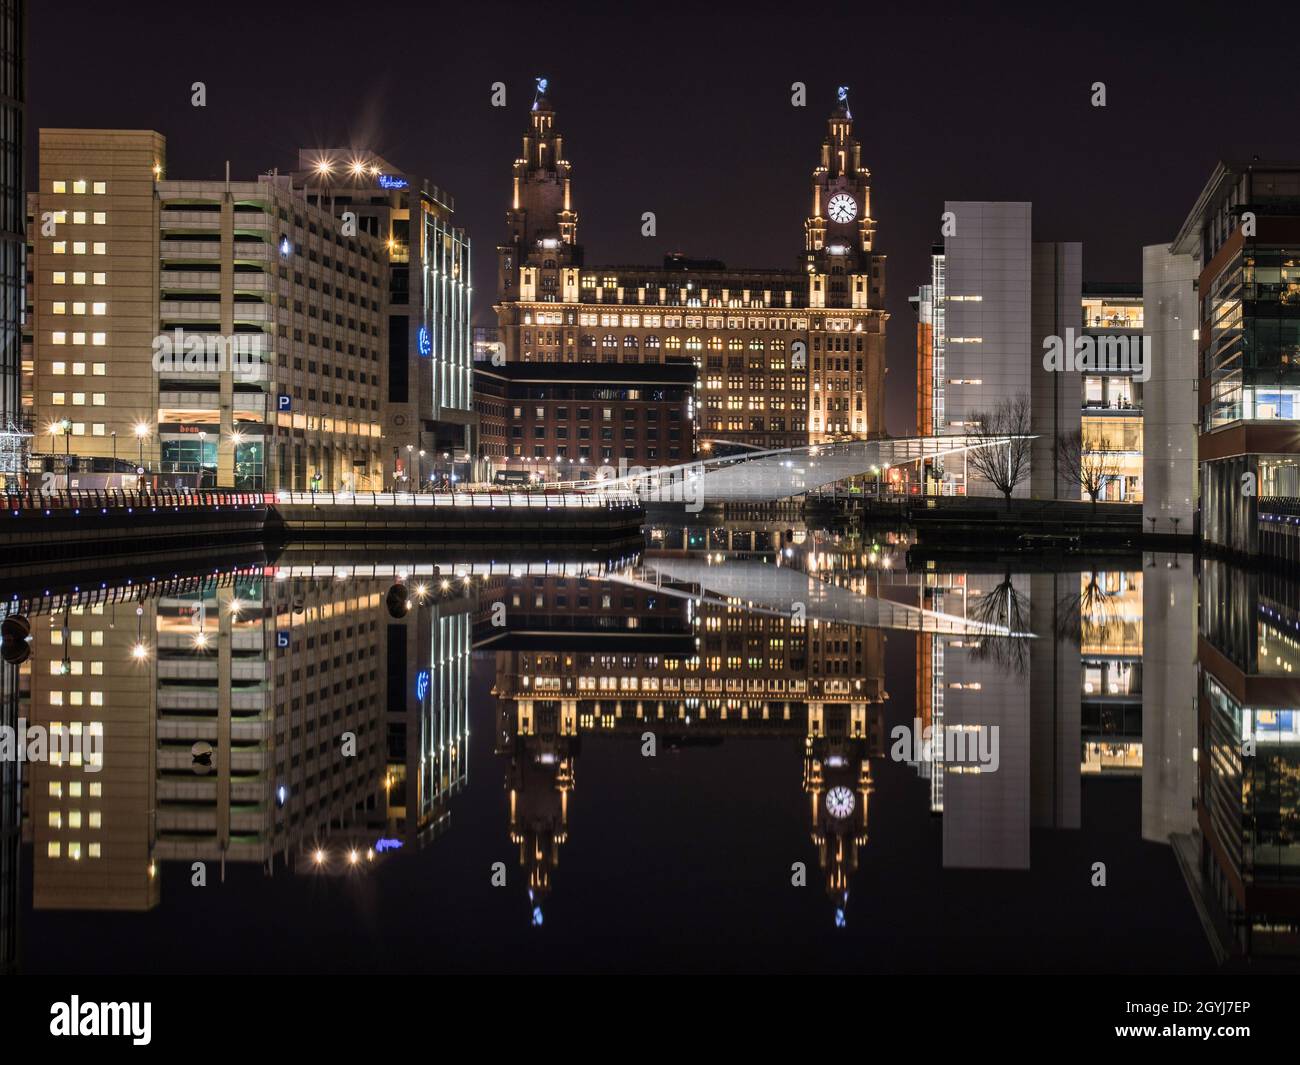 LIVERPOOL, UNITED KINGDOM - Jan 06, 2021: Liverpool Waterfront on a cold winters night with icy glass-like water . Stock Photo